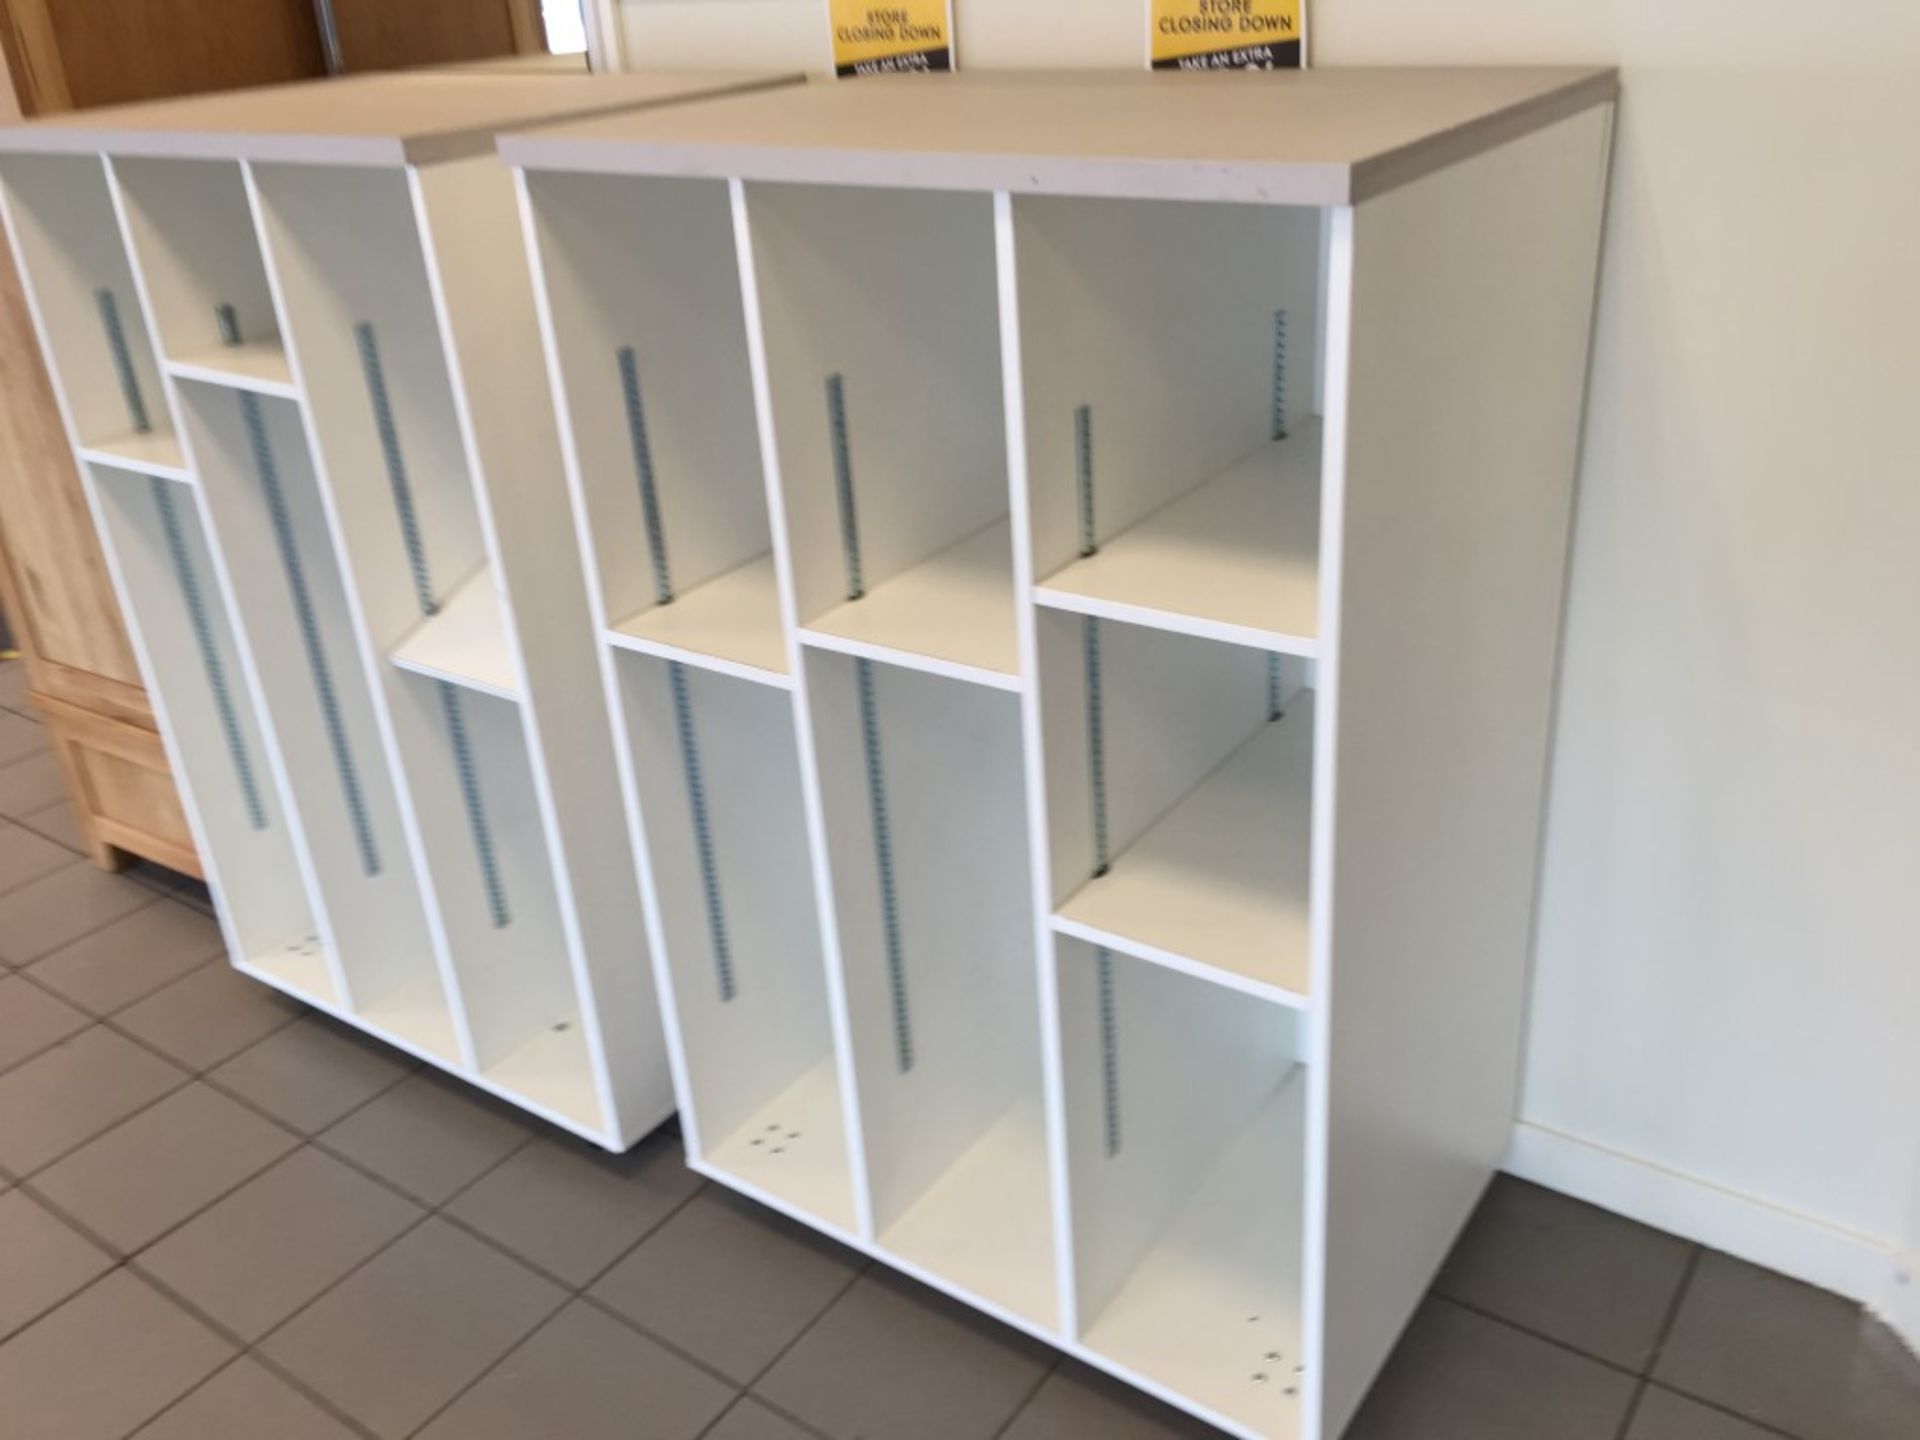 2 x Substantial Mobile Floor Display Cabinets with adjustable height shelving - Wheels under have - Image 3 of 14